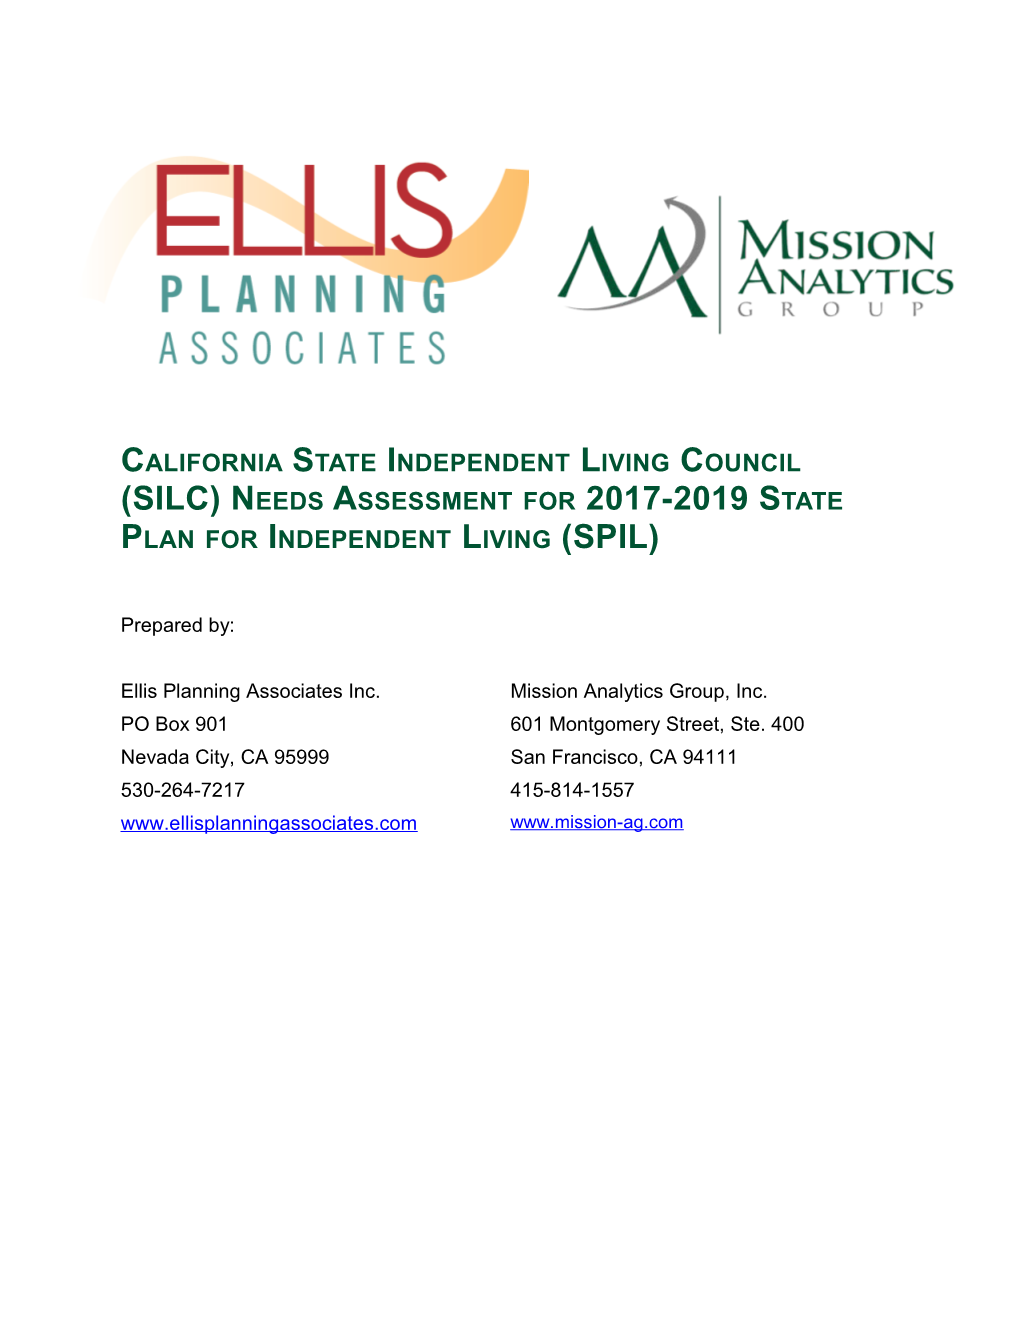 California State Independent Living Council (SILC) Needs Assessment for 2017-2019 State